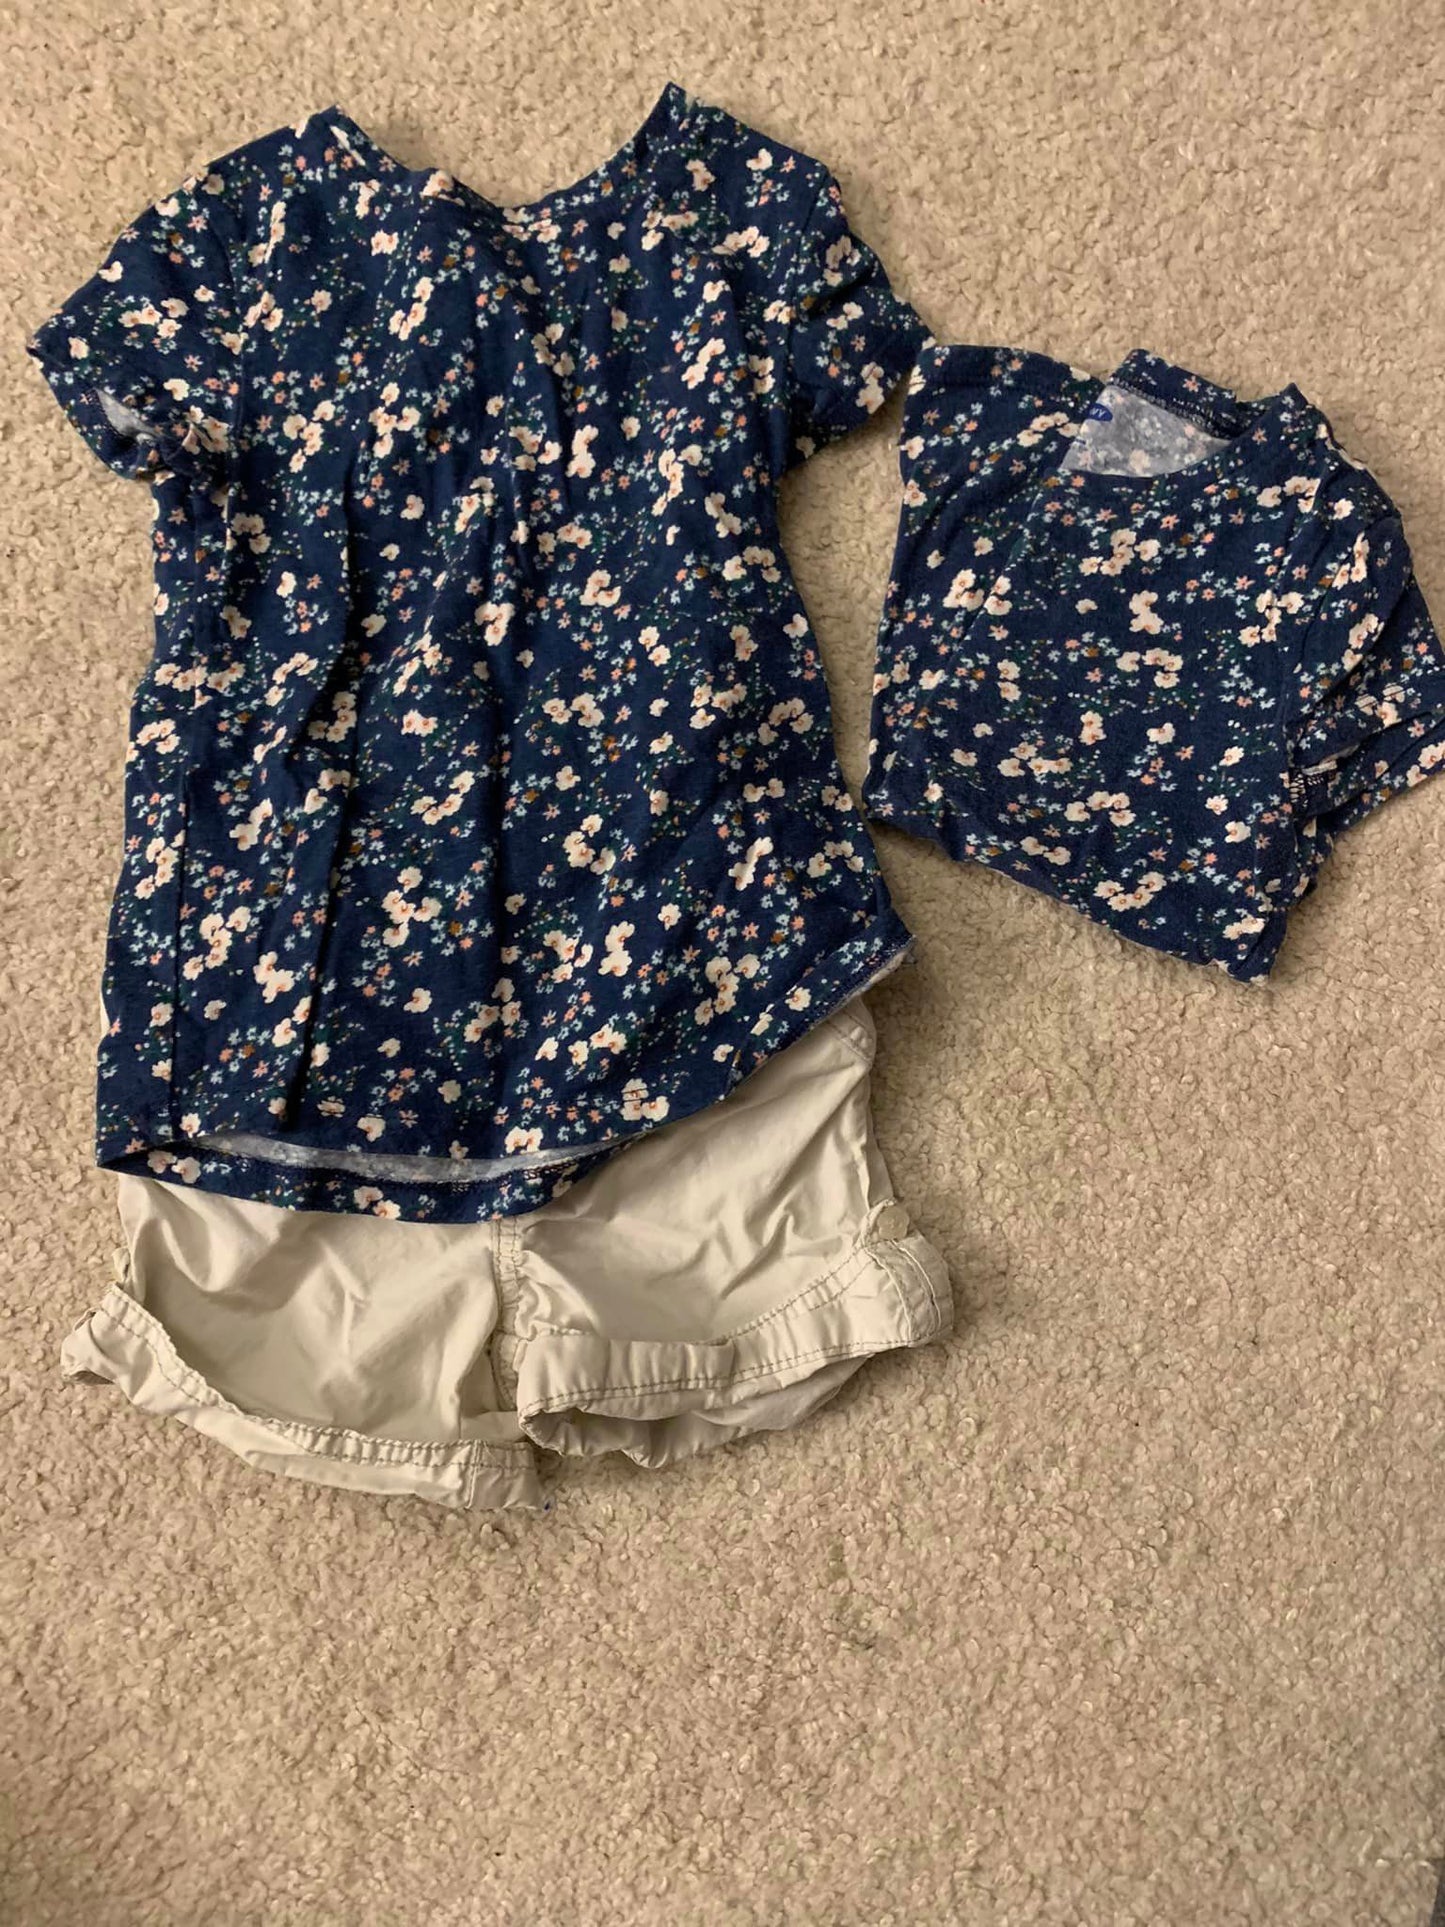 4T Girls Summer Set 3pc (two of the same shirt)